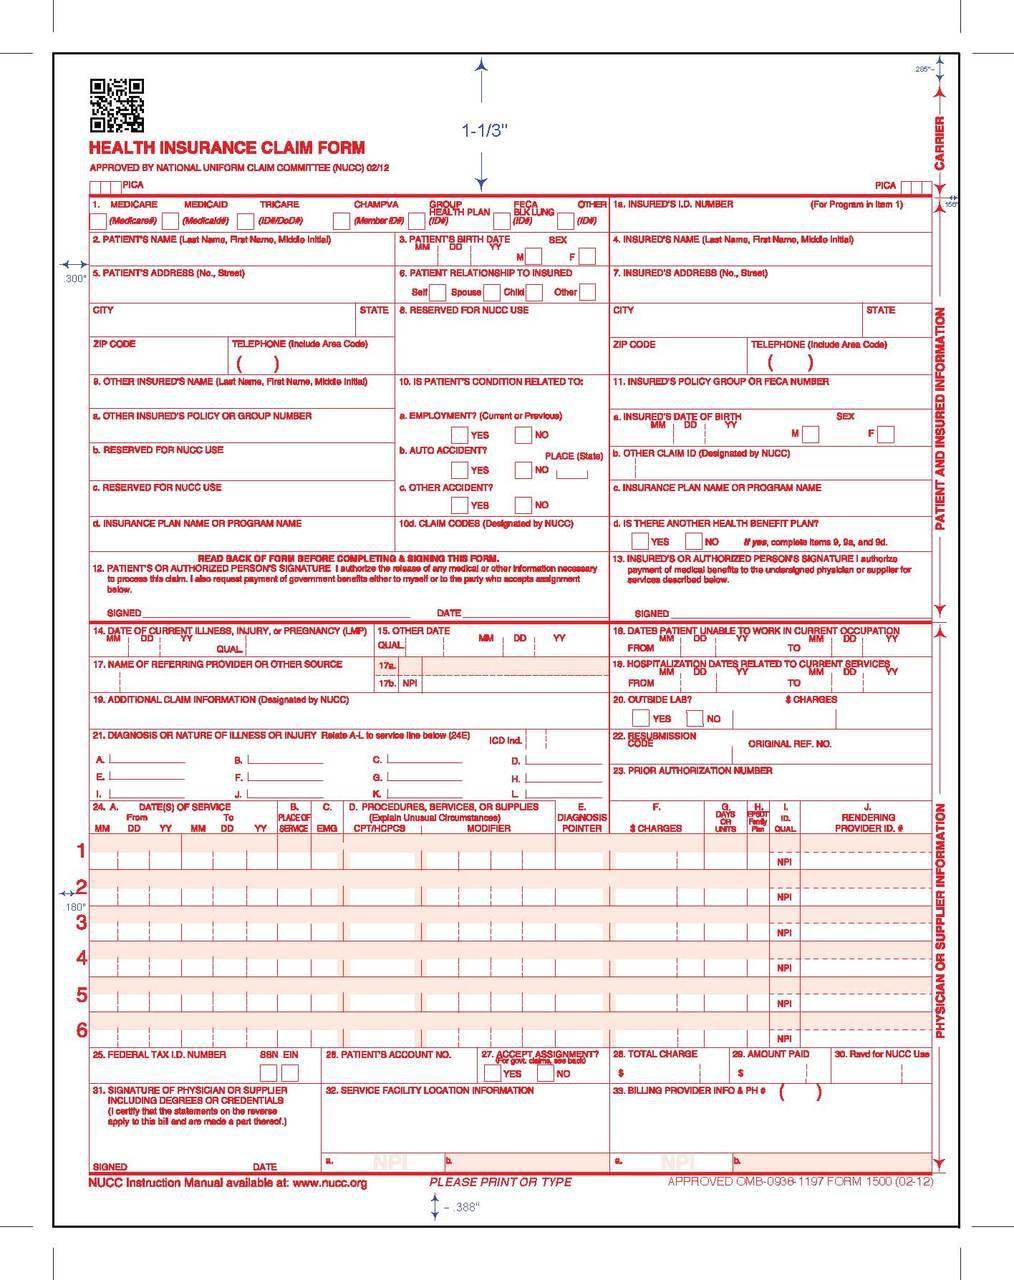 form 4684 instructions 2018